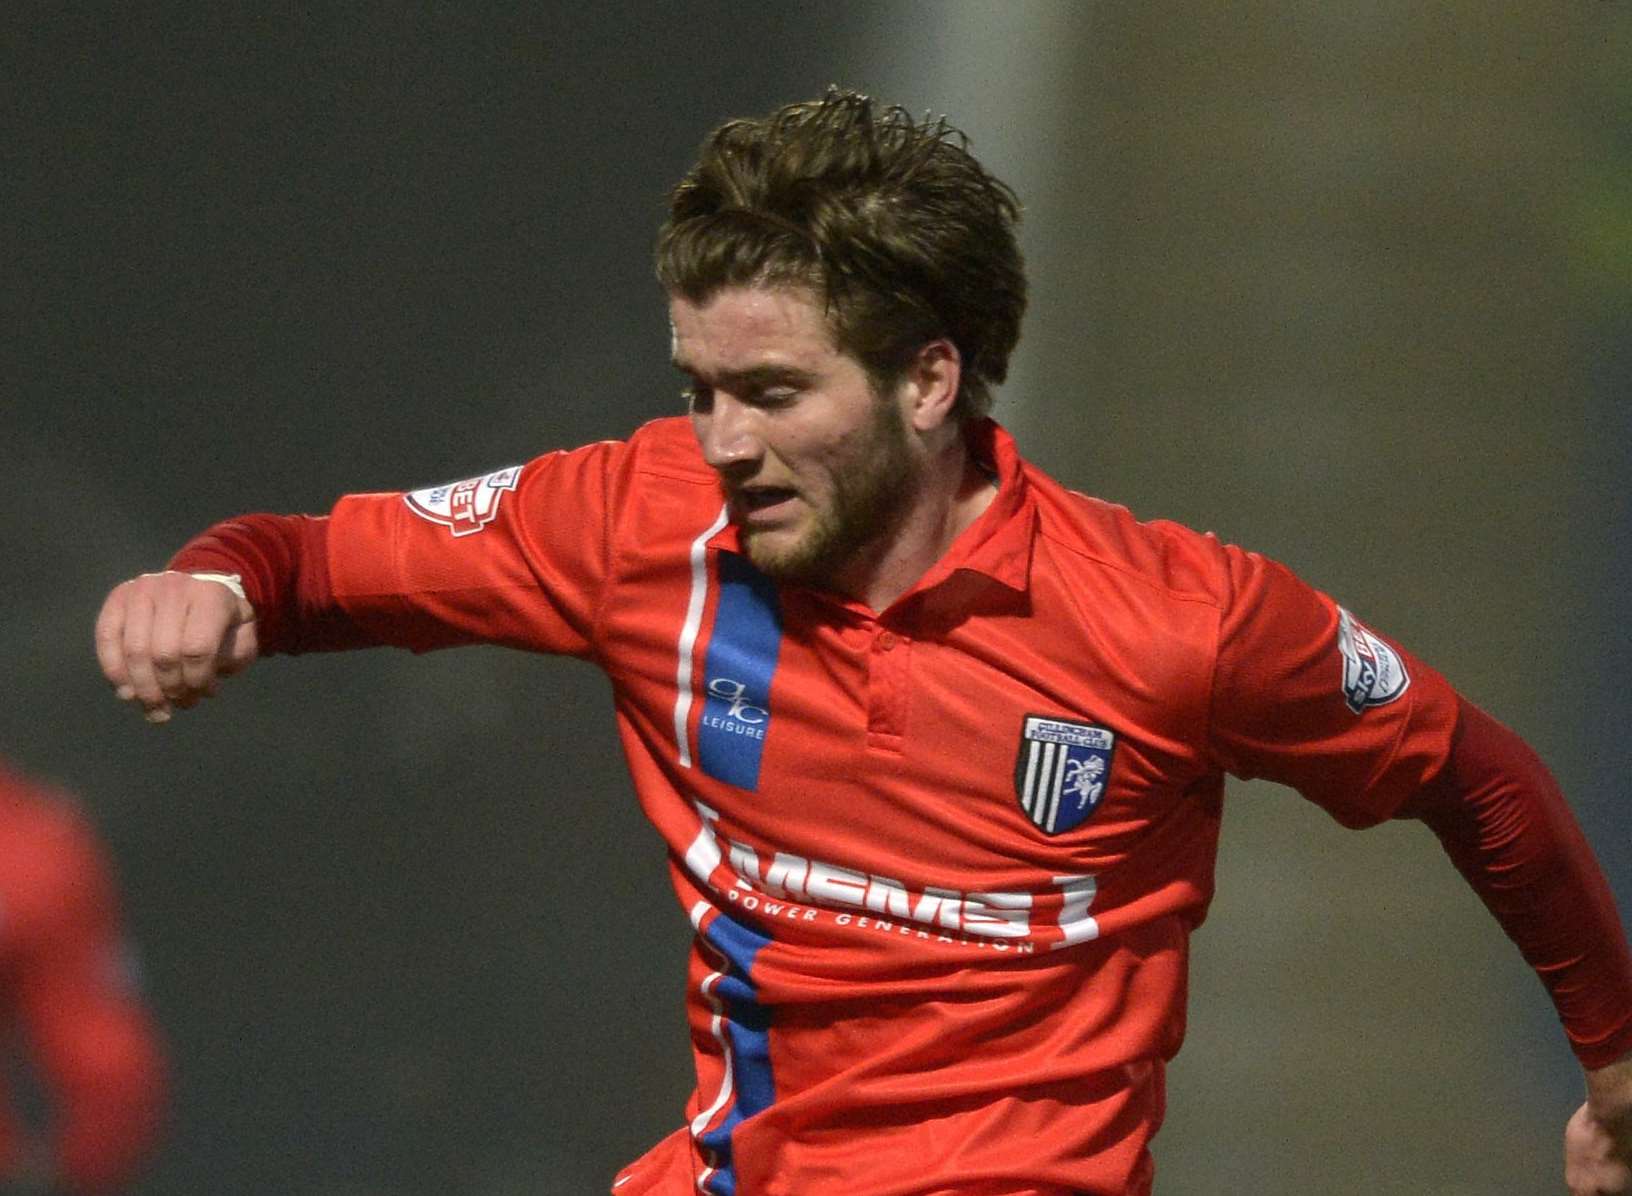 Ollie Muldoon playing for Gillingham at Chesterfield in League 1 Picture: Barry Goodwin